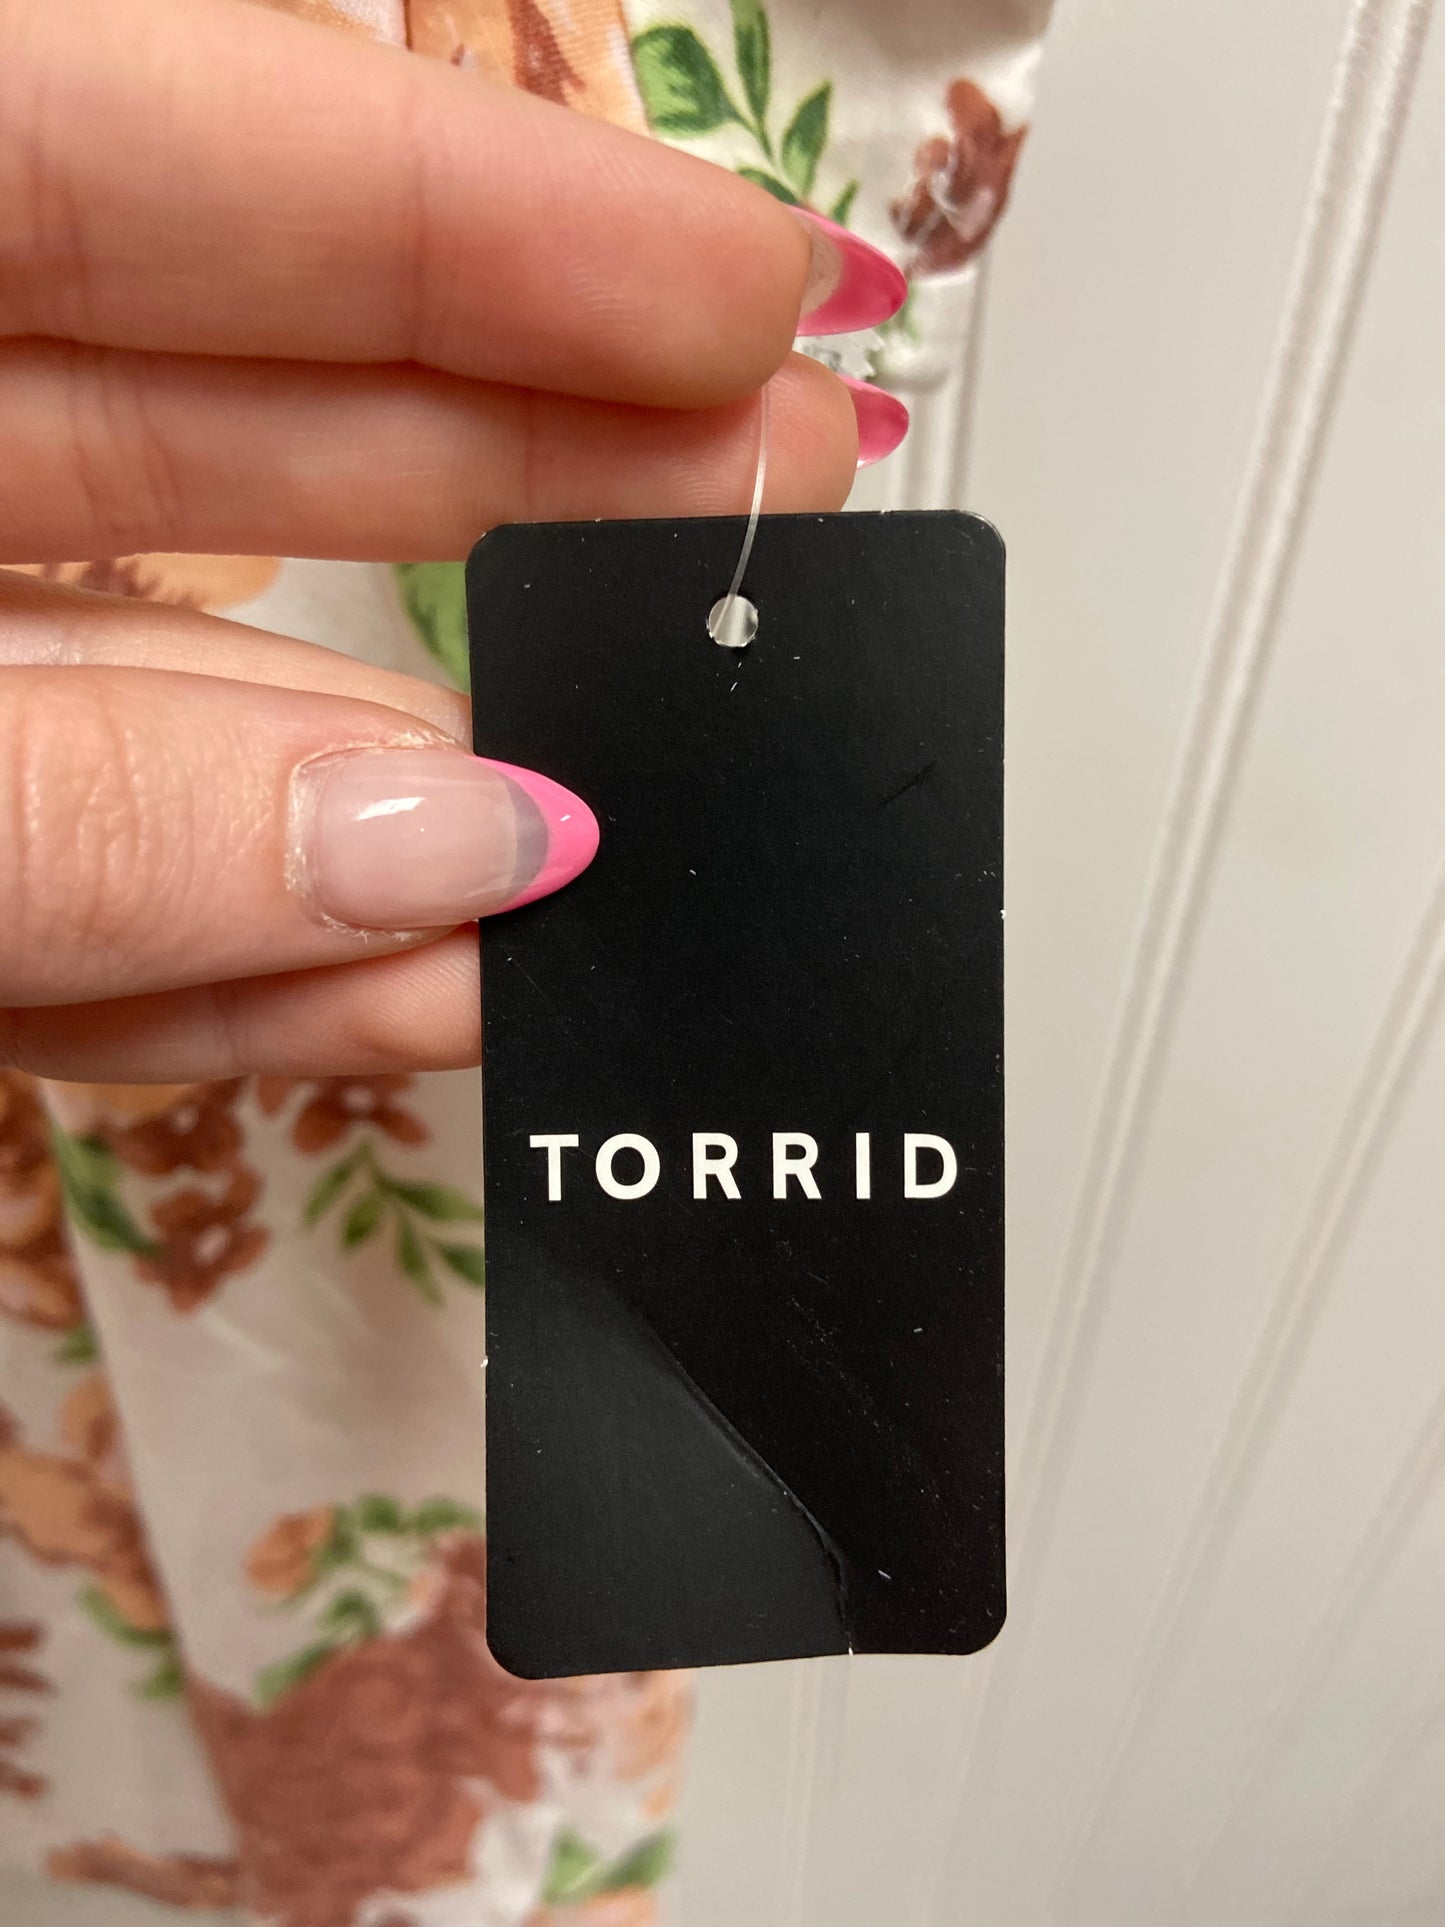 Top Short Sleeve By Torrid  Size: 4x